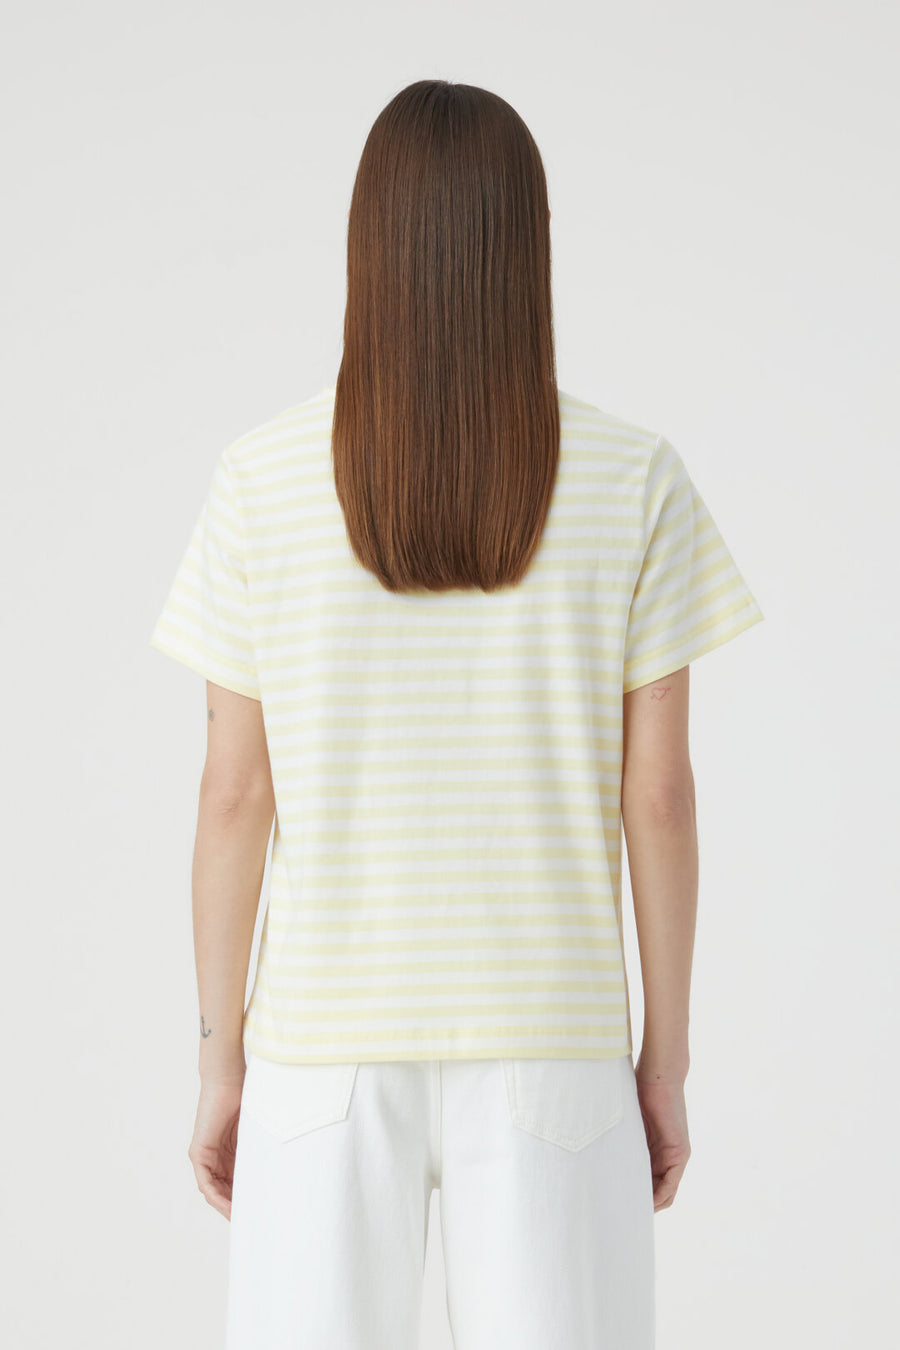 Closed T-Shirt - Yellow Orchid